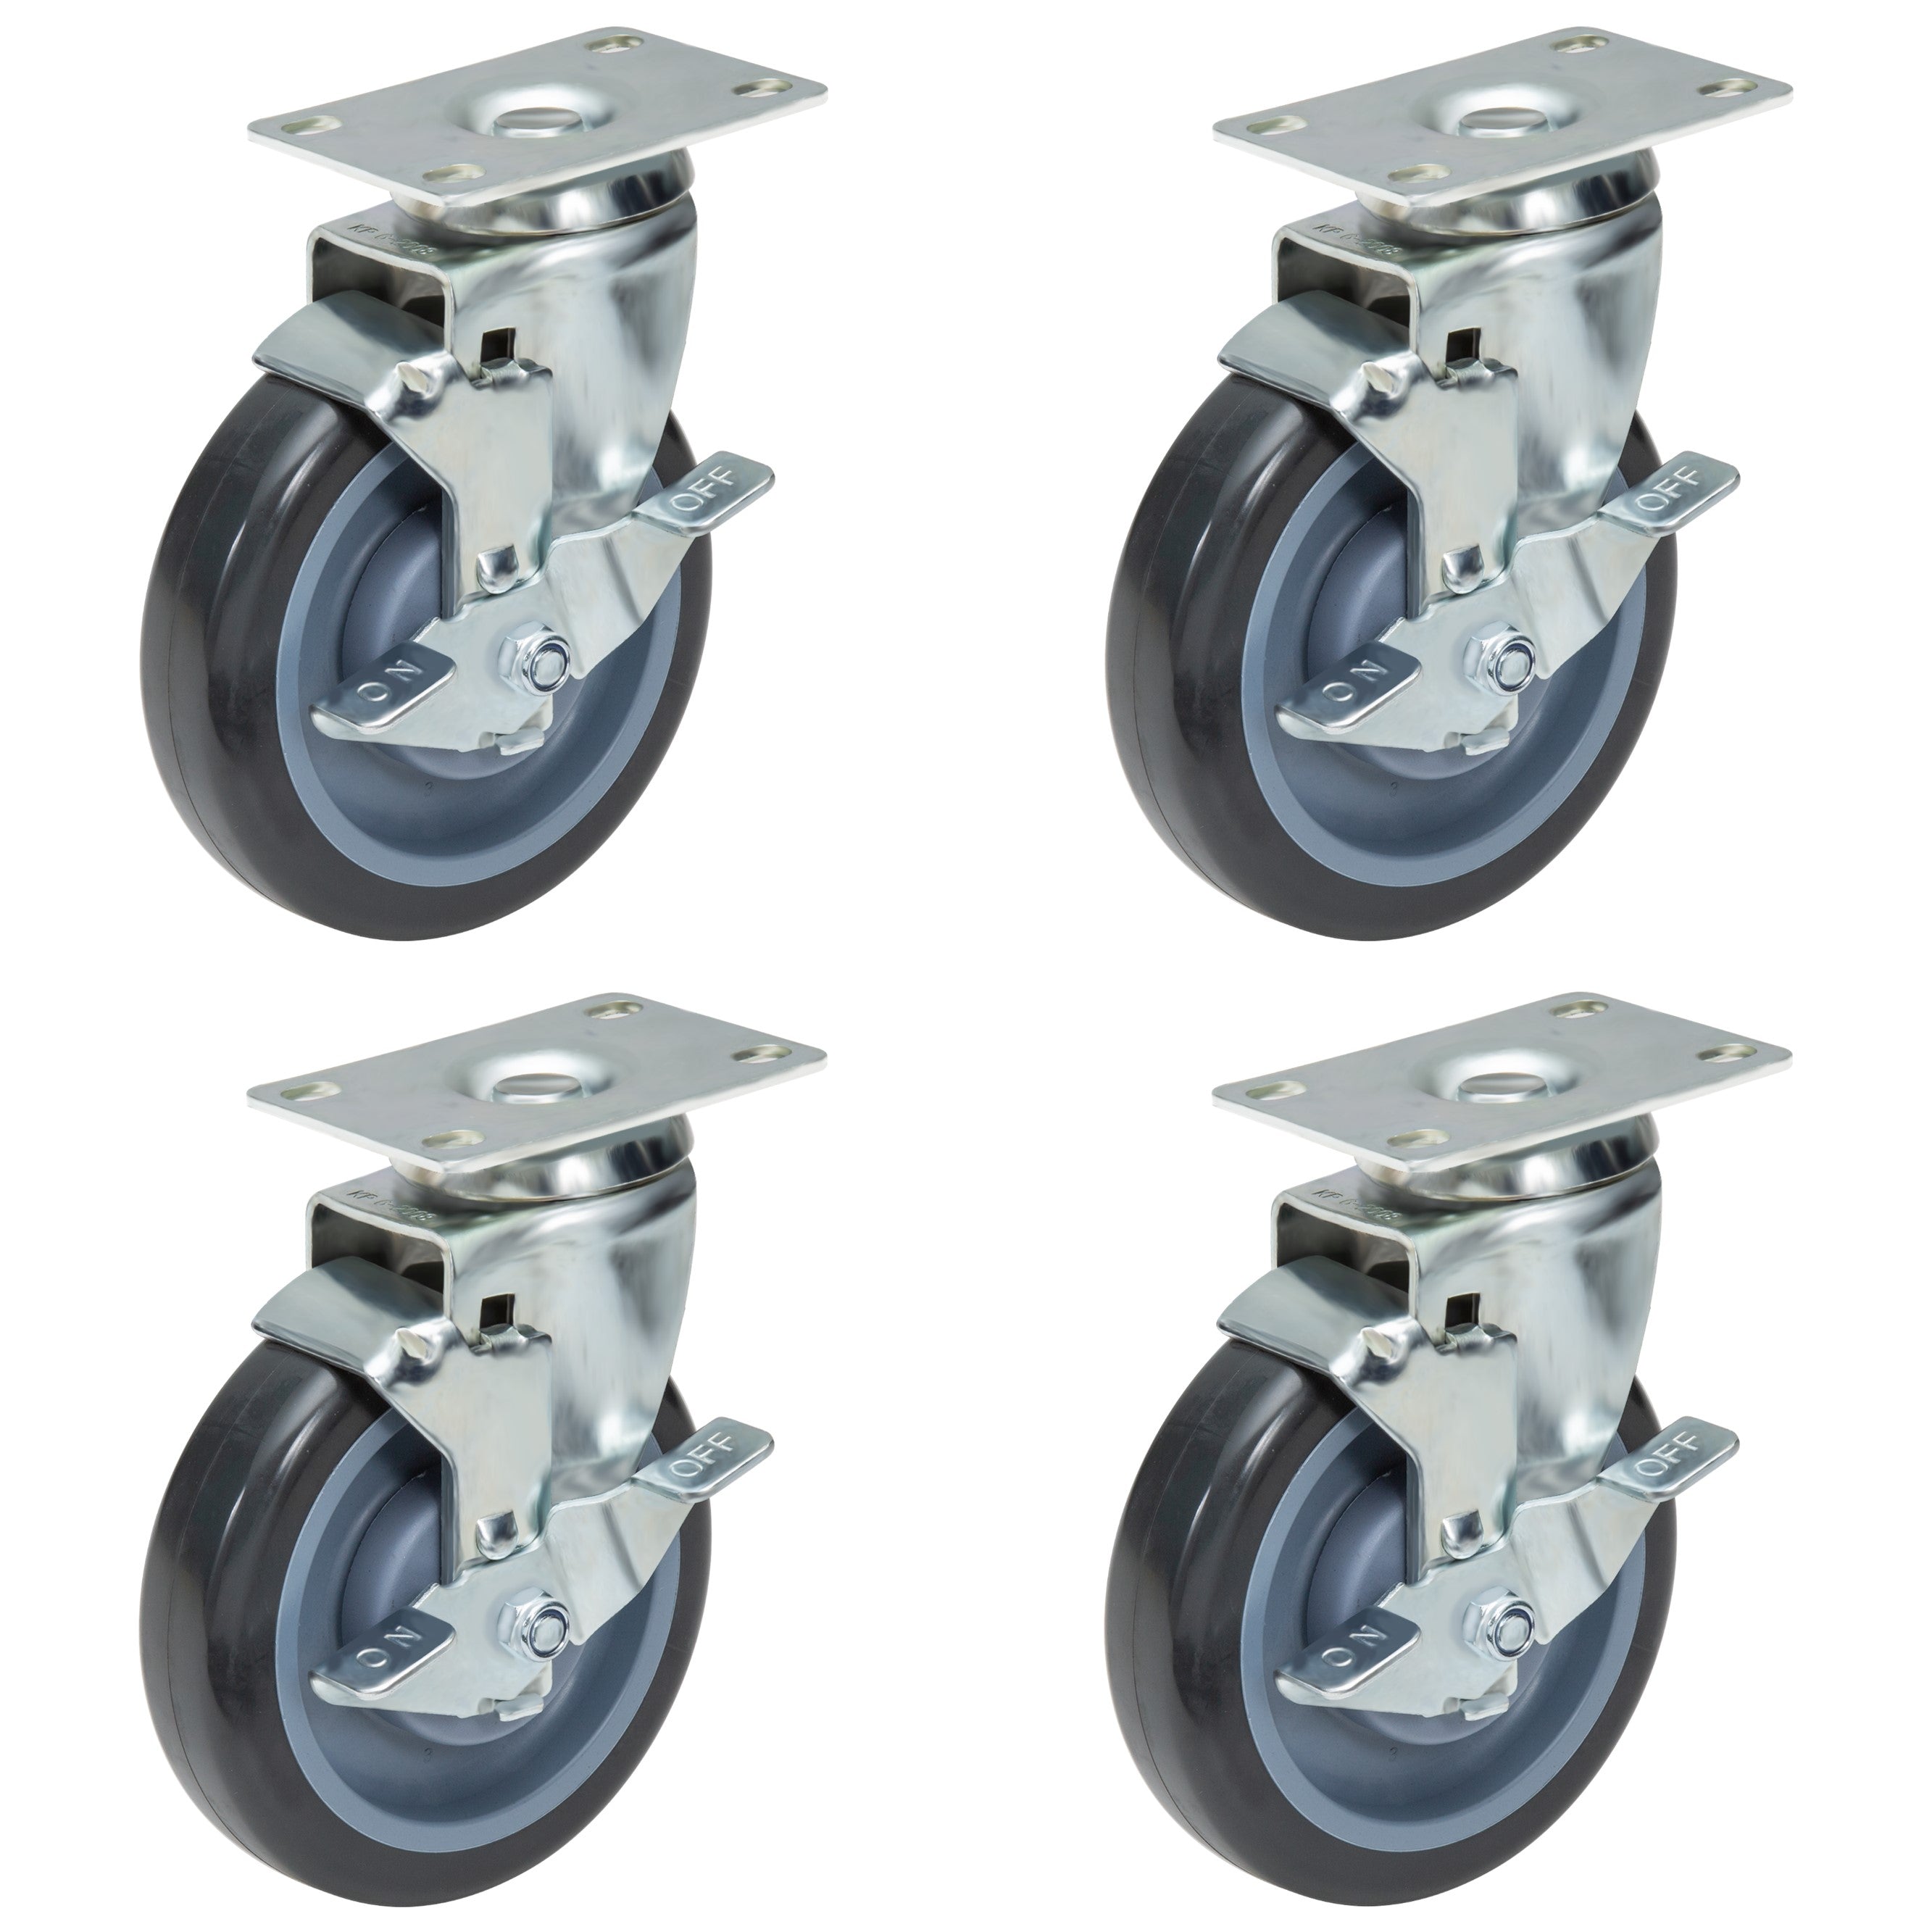 GSW 3" Plate Caster Set of 4, Industrial Casters with Capacity 1160 LBs,Heavy Duty Casters - Use for Inventory Carts, Workbench, Platform Cart (Swivel with Brake)